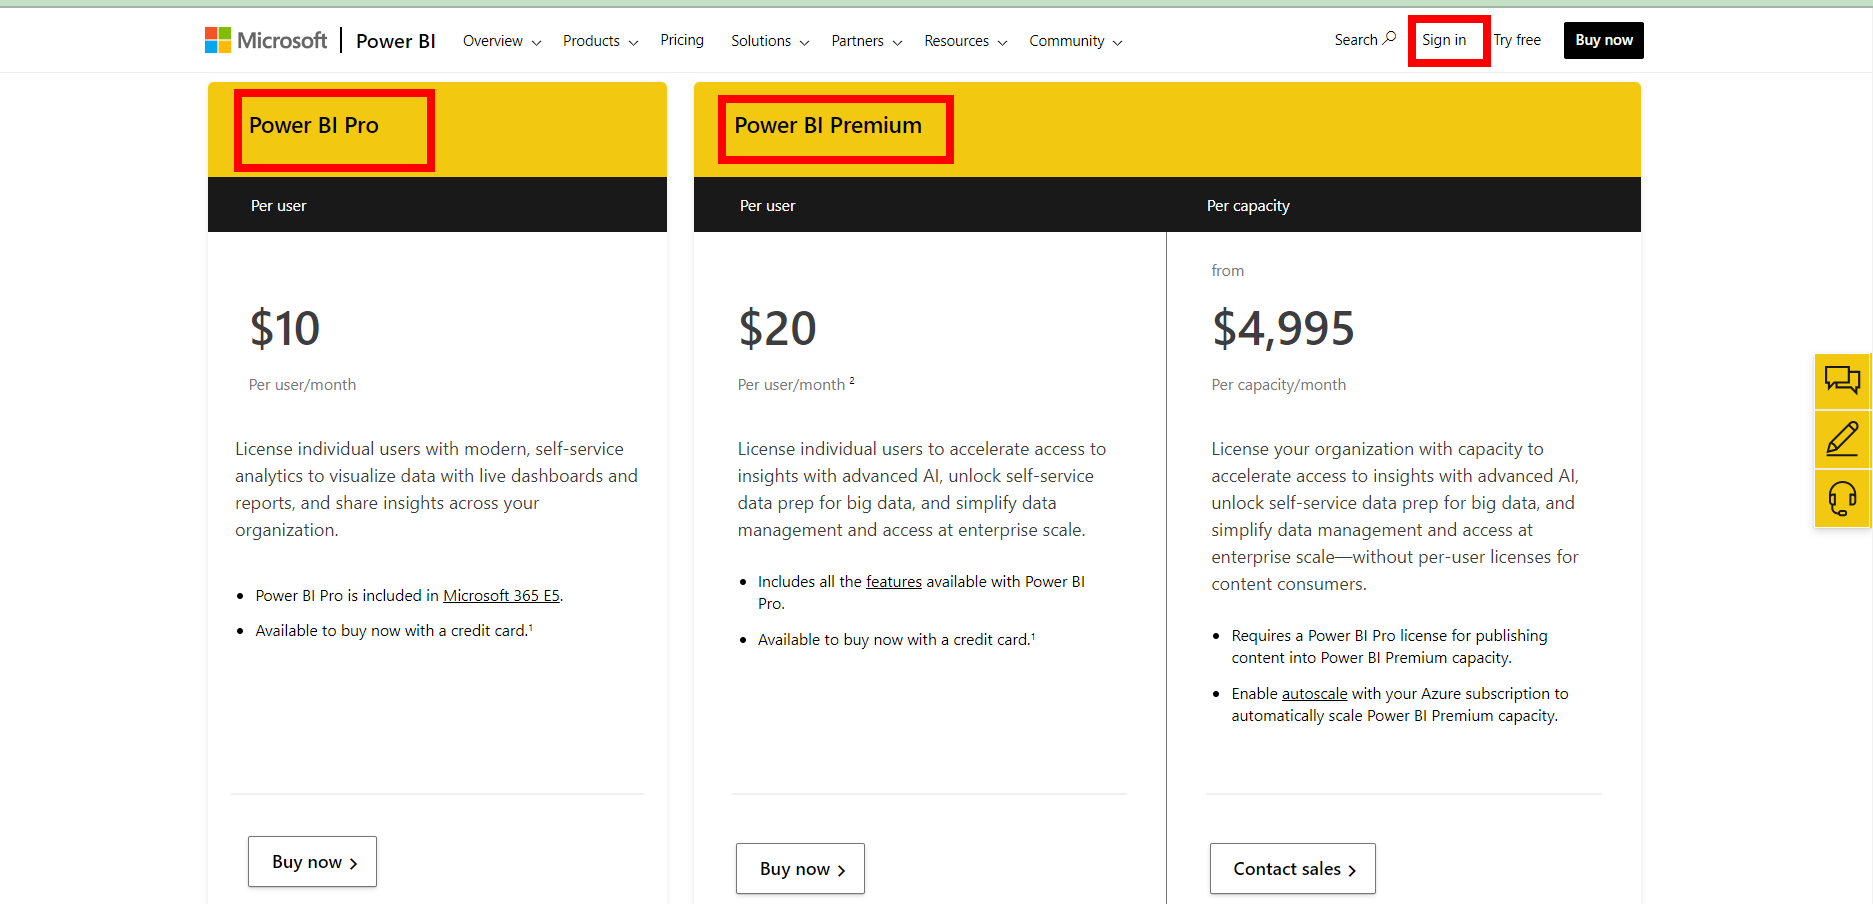 Different sign-in options available for Power BI